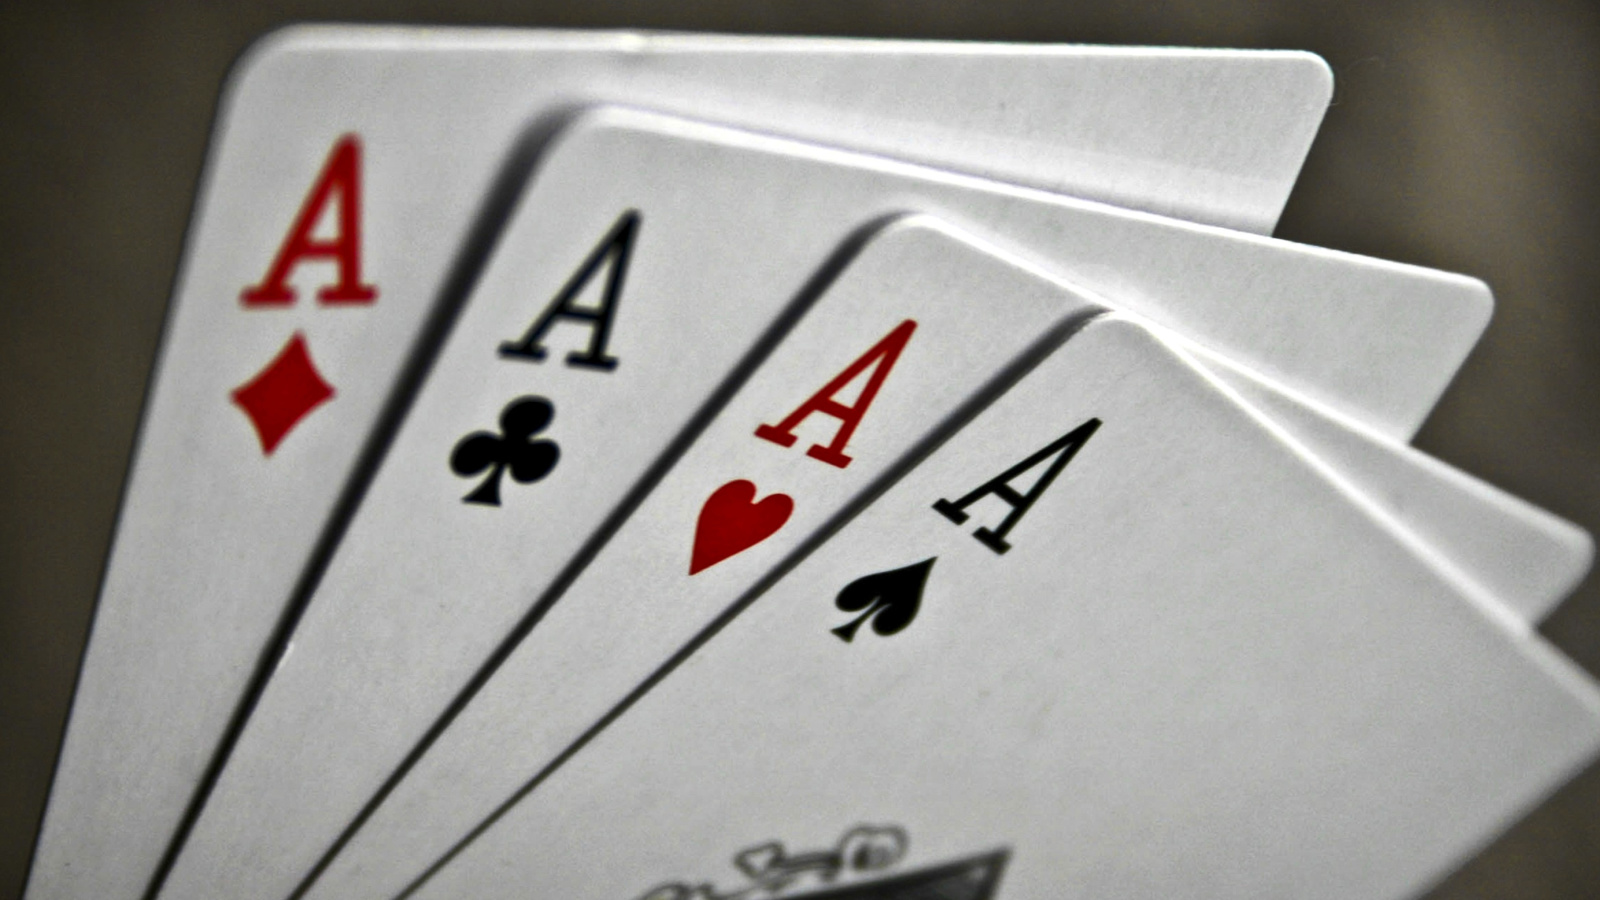 Deck of playing cards wallpaper 1600x900